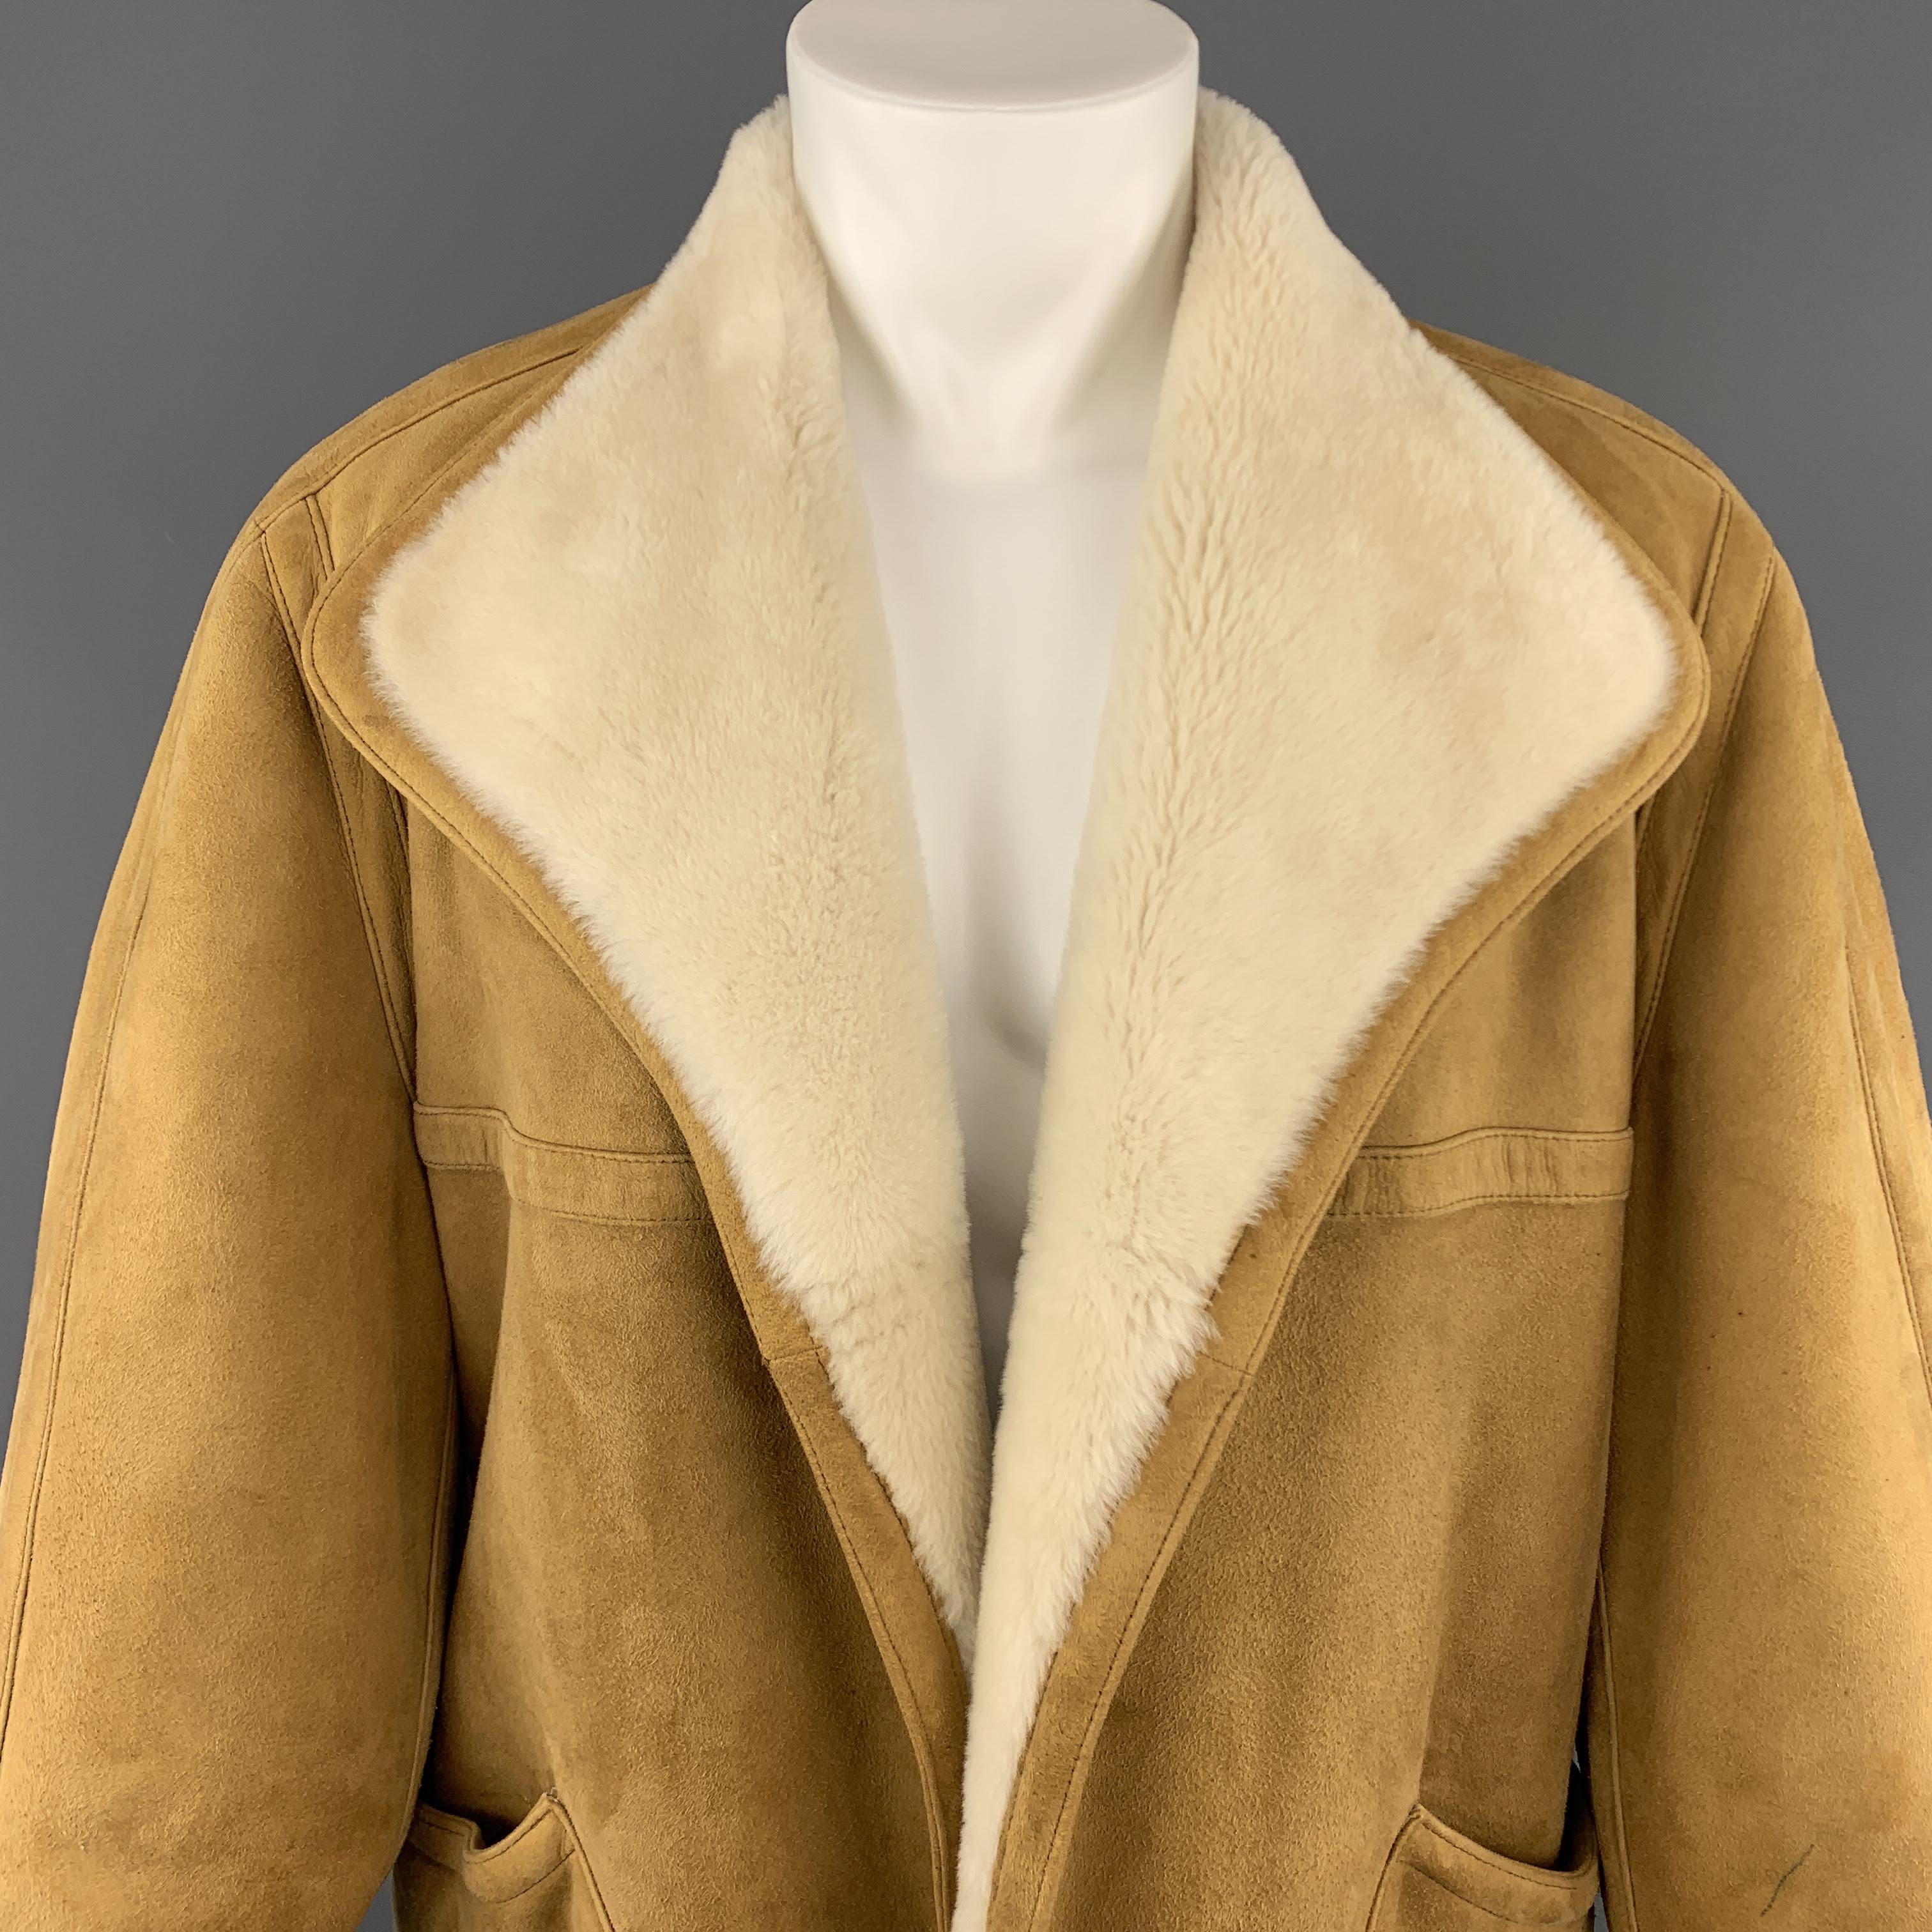 Vintage HERMES over coat comes in golden tan suede shearling with full cream trimmed fur interior and features a wide pointed collar, open front, and oversized patch pockets. Pen mark on sleeve. As-is. Otherwise excellent condition. Made in France.
